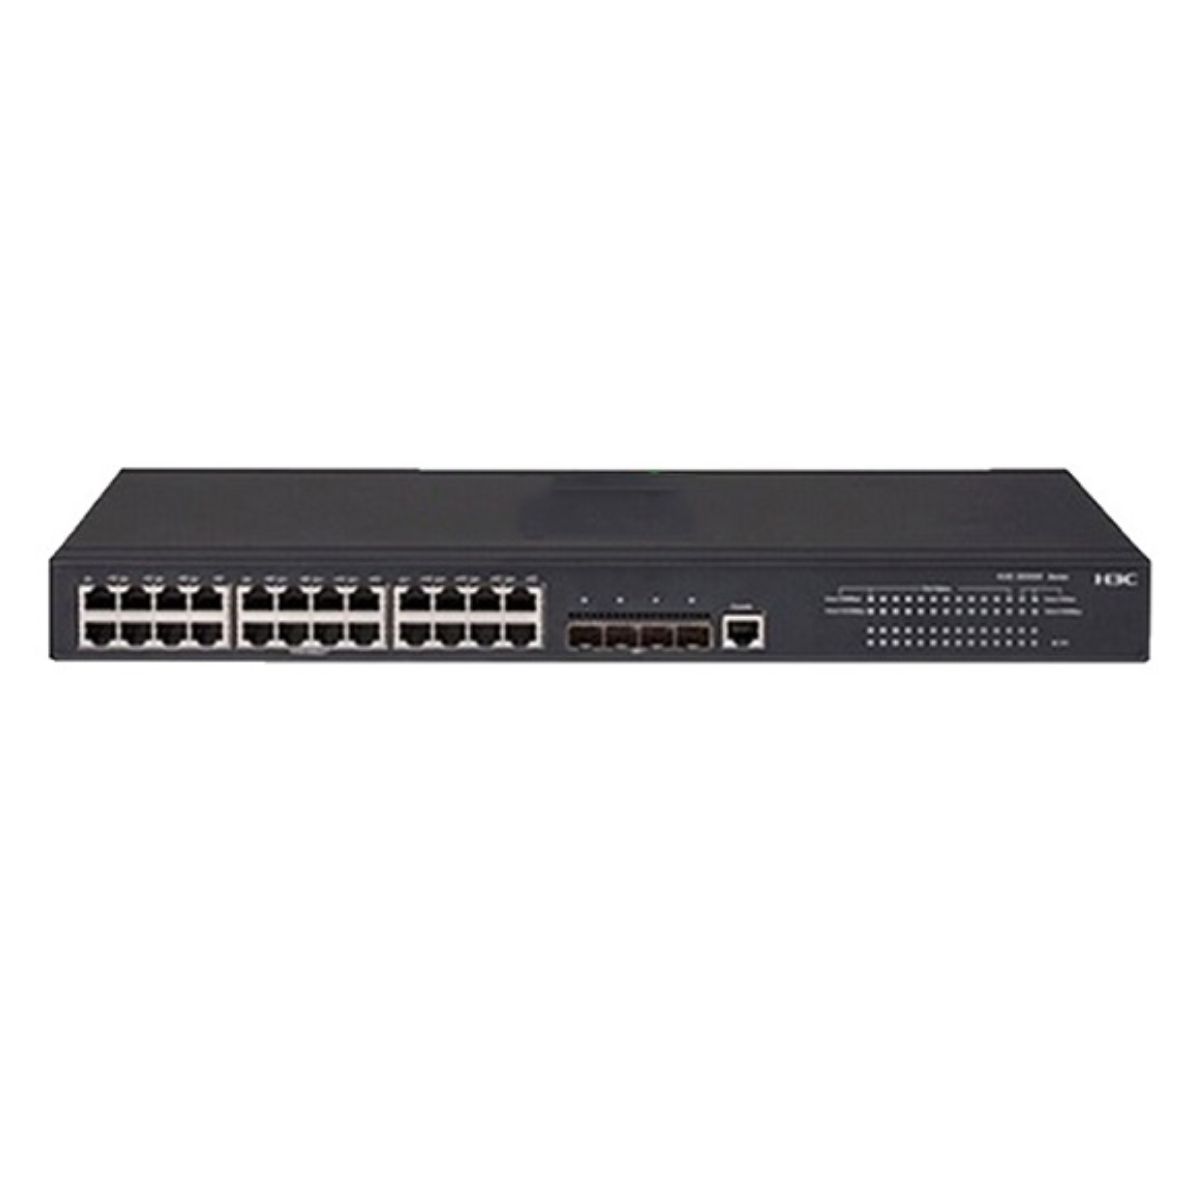 Switch PoE 28 cổng H3C LS-5560S-28P-SI 56Gbps, 24 cổng 10/100/1000 BASE-T, 4 cổng SFP+ 1/10GE